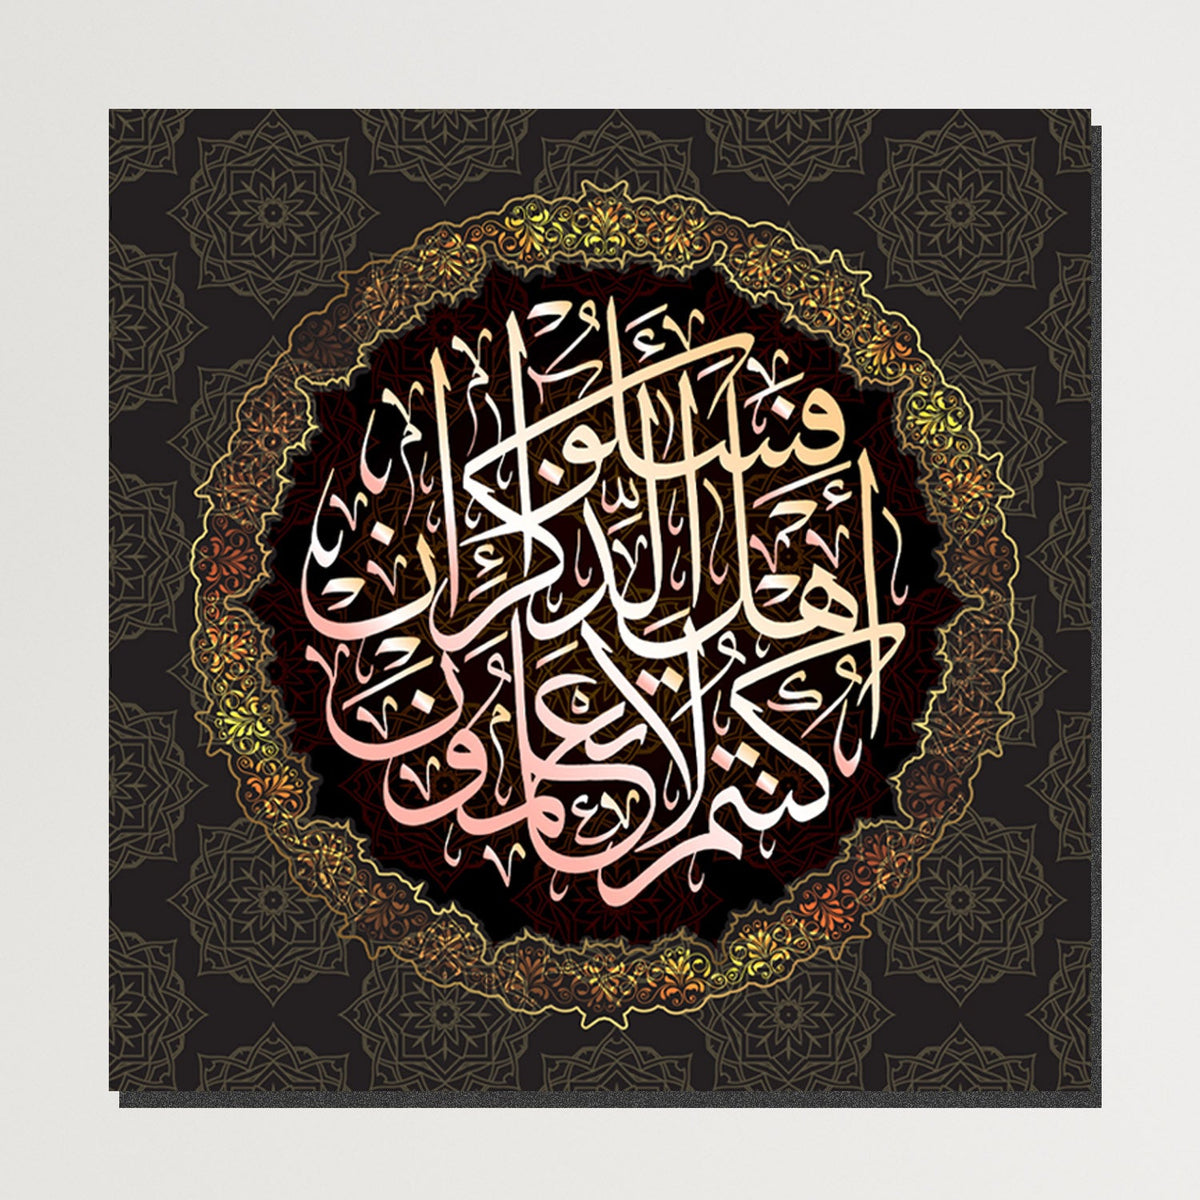 https://cdn.shopify.com/s/files/1/0387/9986/8044/products/IslamicArtLimitedEdition12CanvasArtprintStretched-Plain.jpg